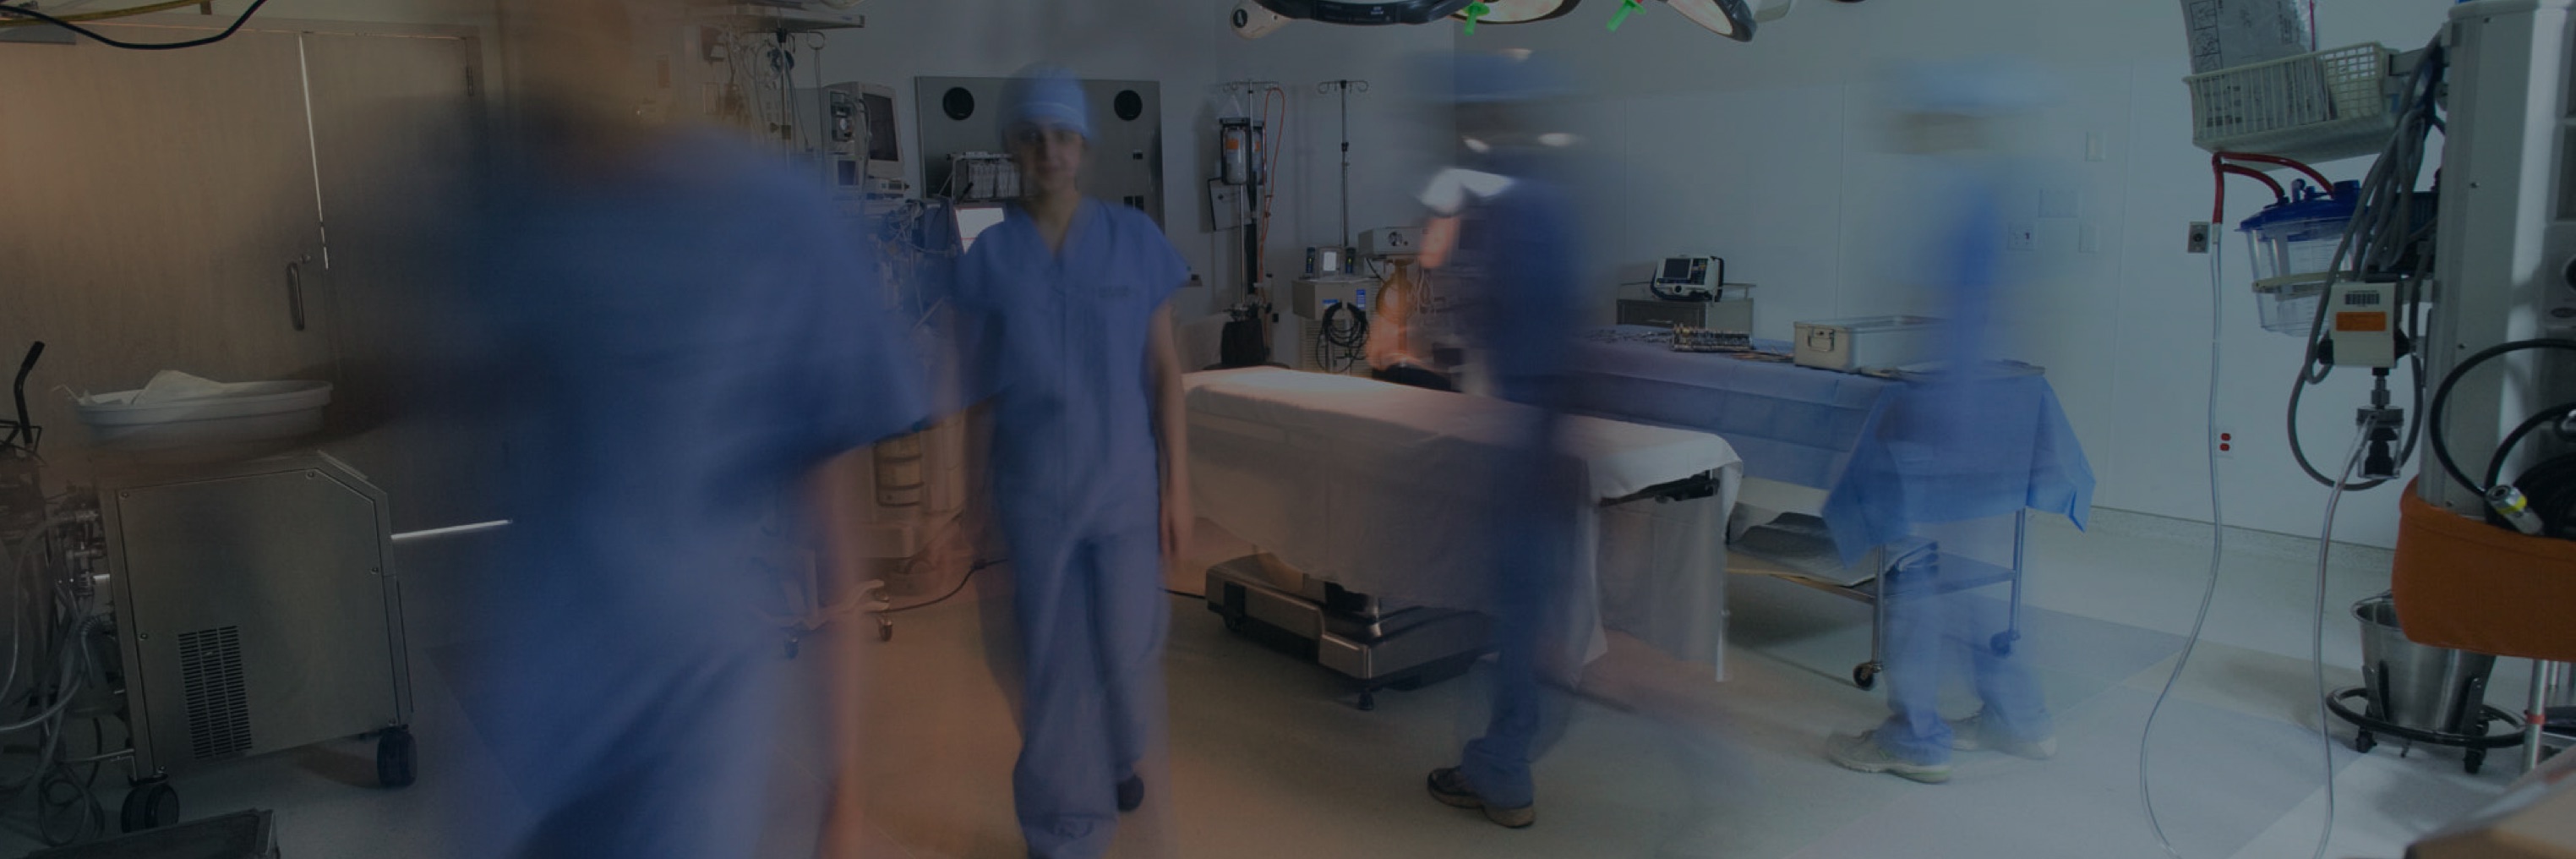 Doctors moving around in an operating room